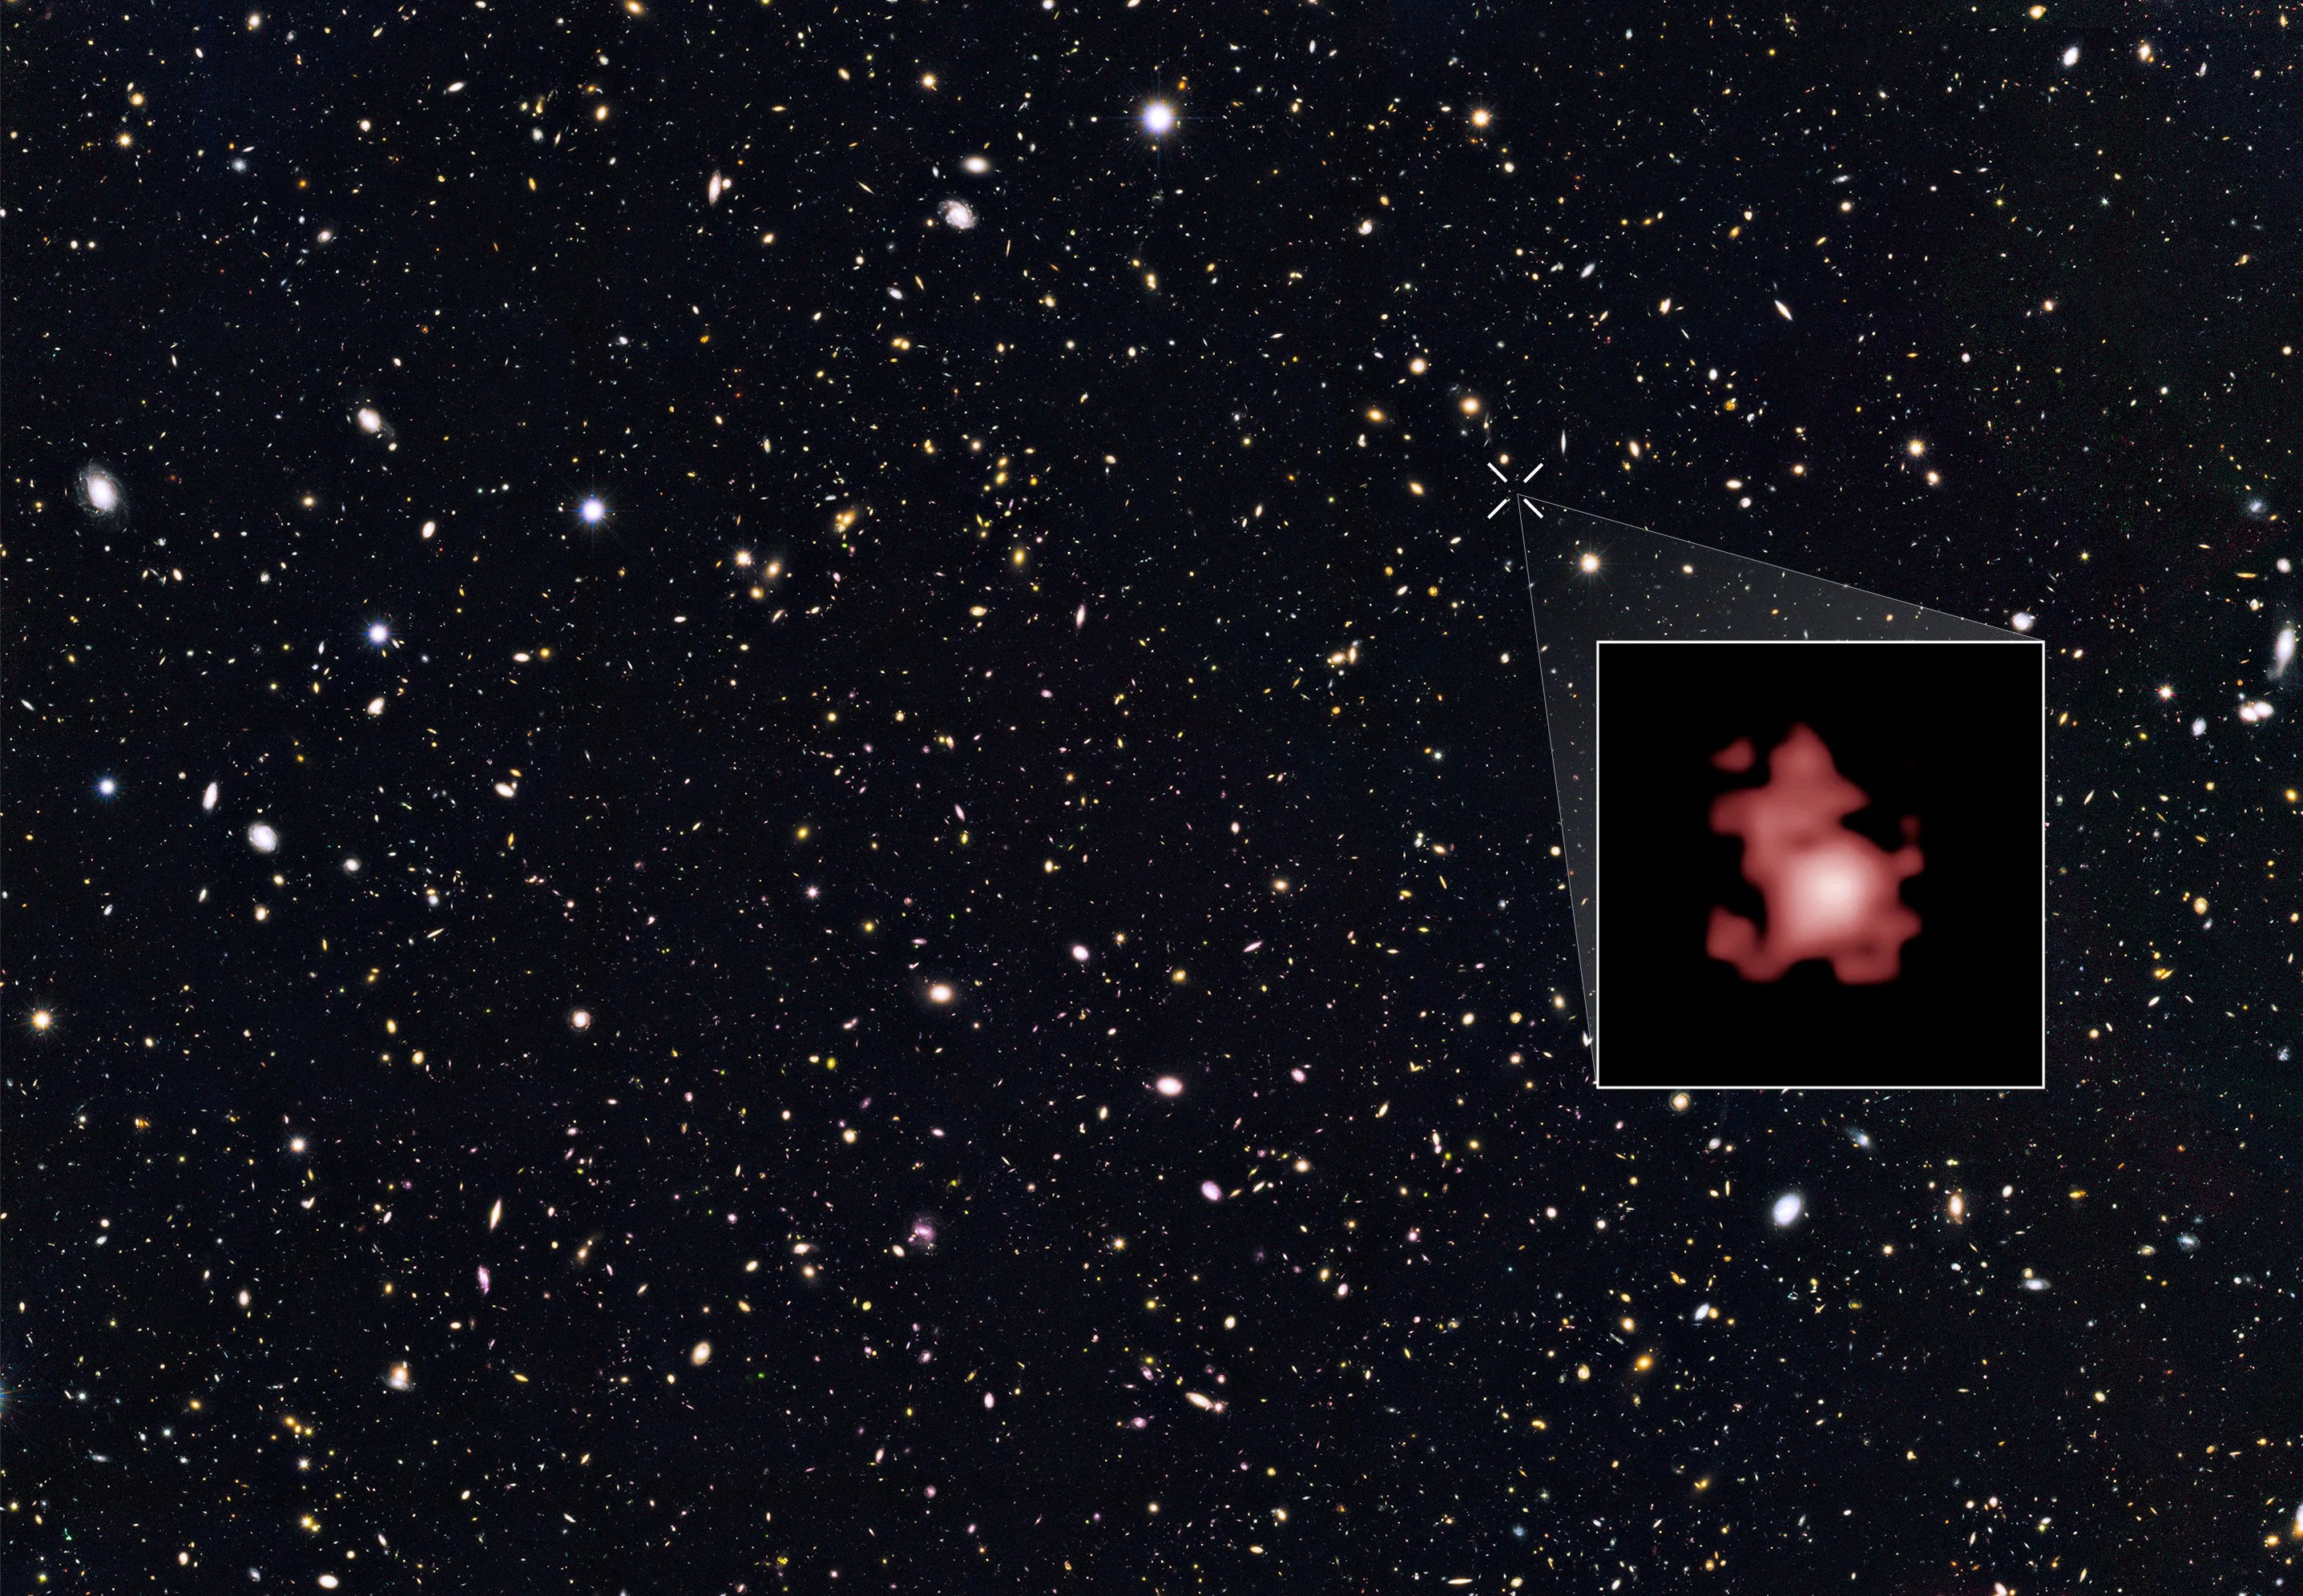 Hubble survey field containing tens of thousands of galaxies including one seen 13.4 billion years in the past